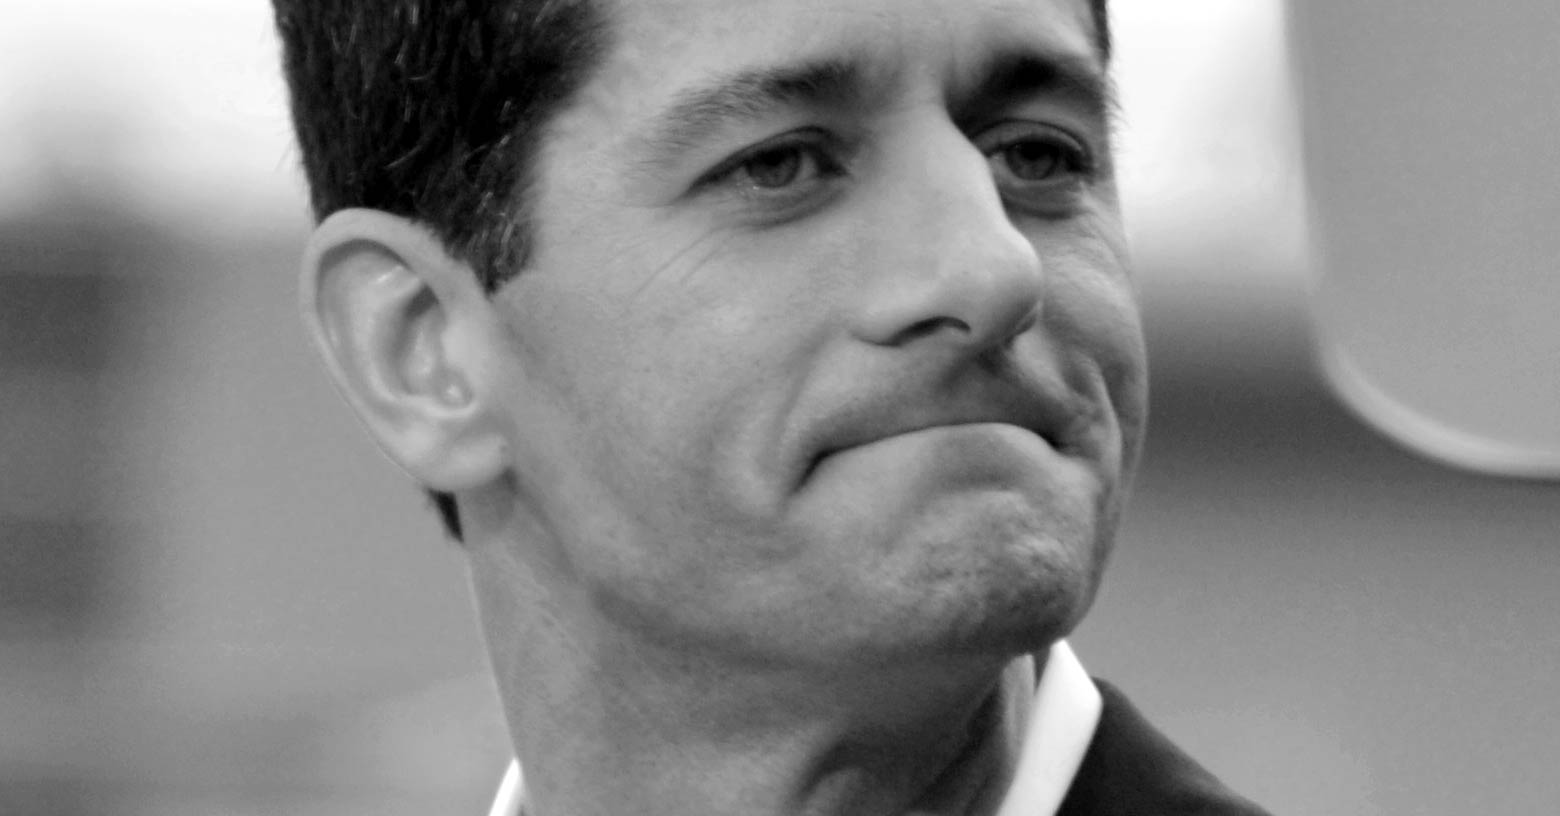 Speaker Paul Ryan doesn't care about you